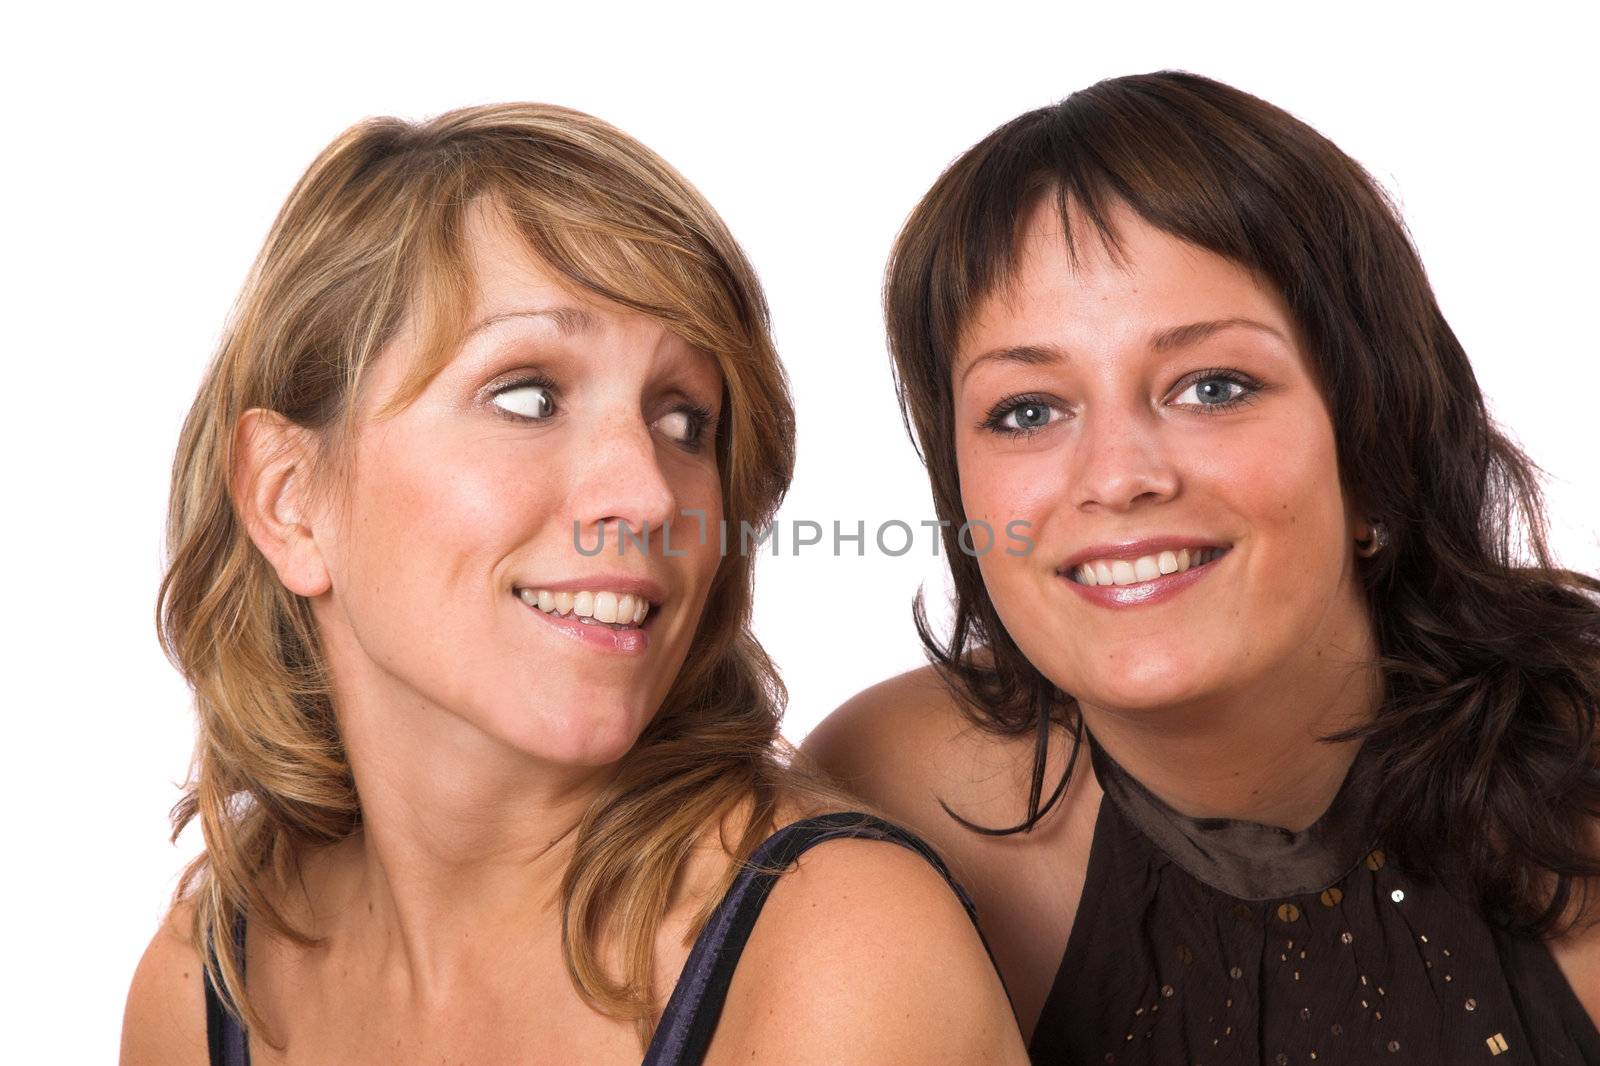 Two sisters posing together on white background